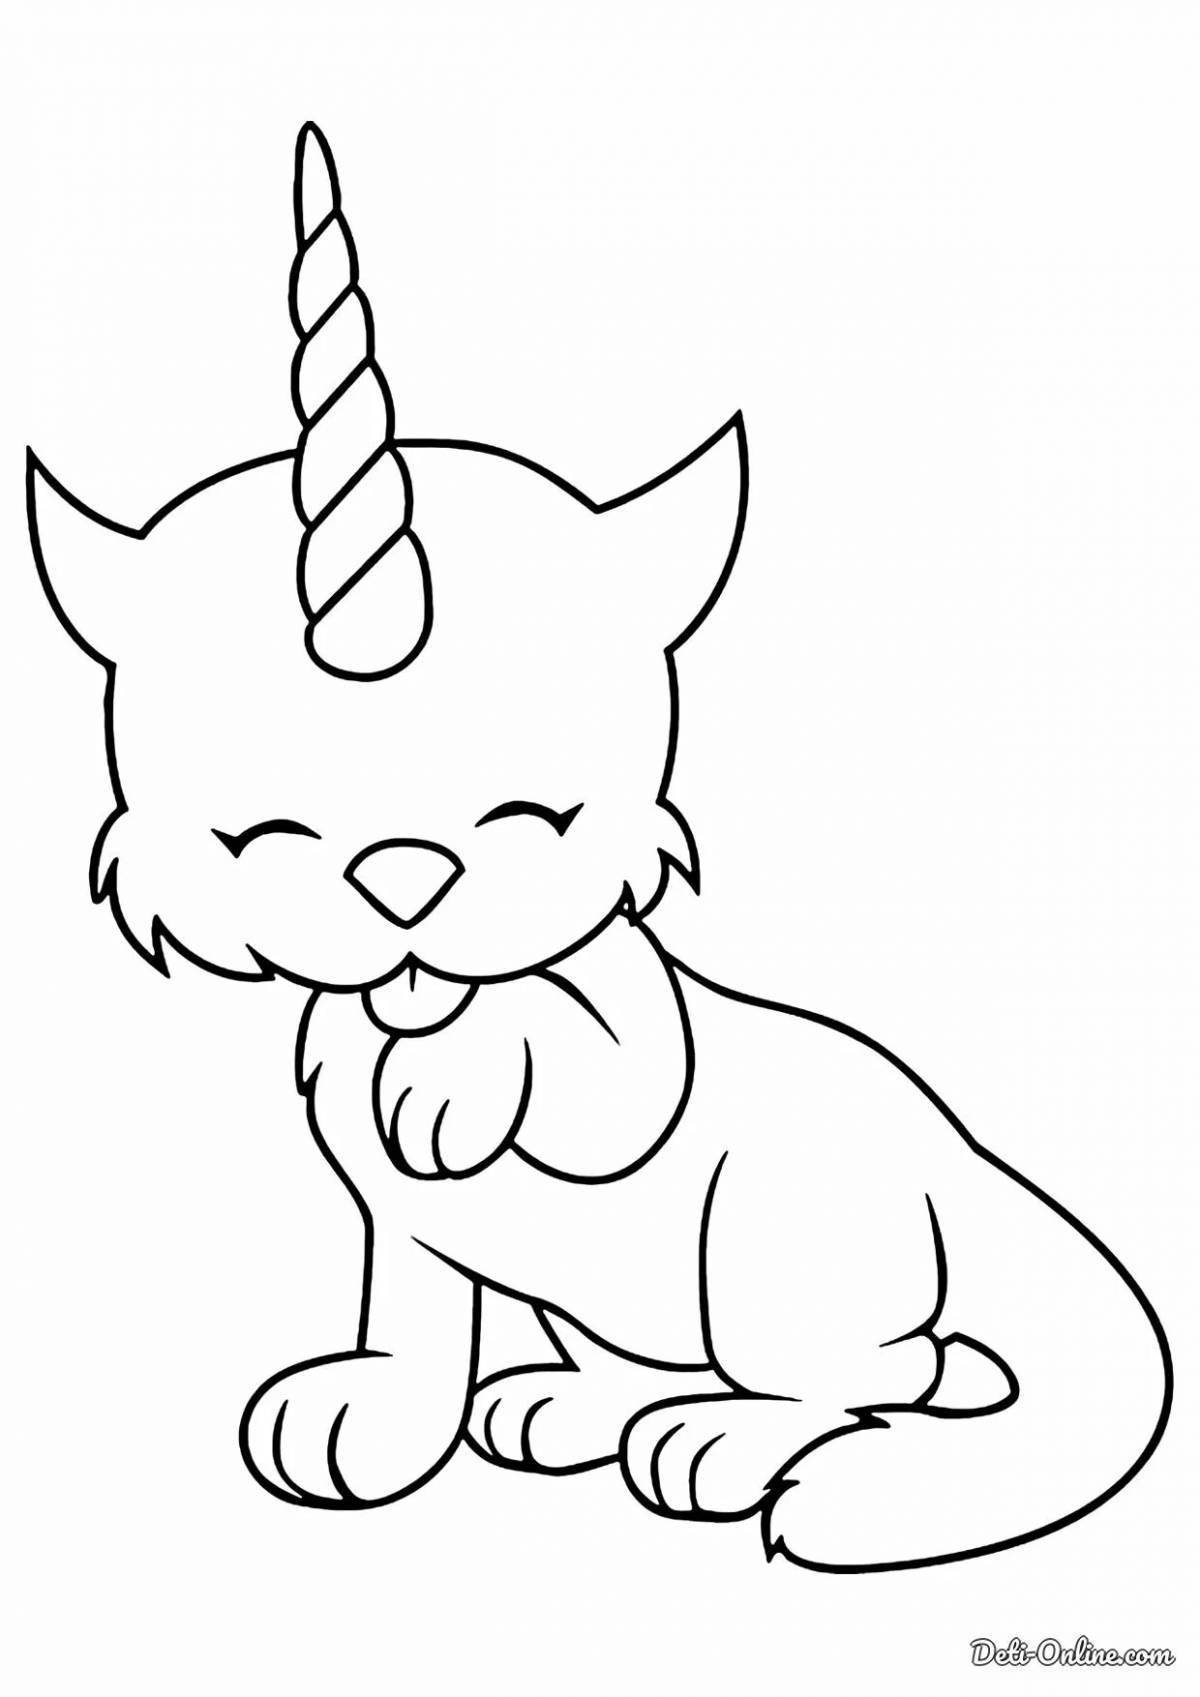 Radiant coloring page unicorn cat